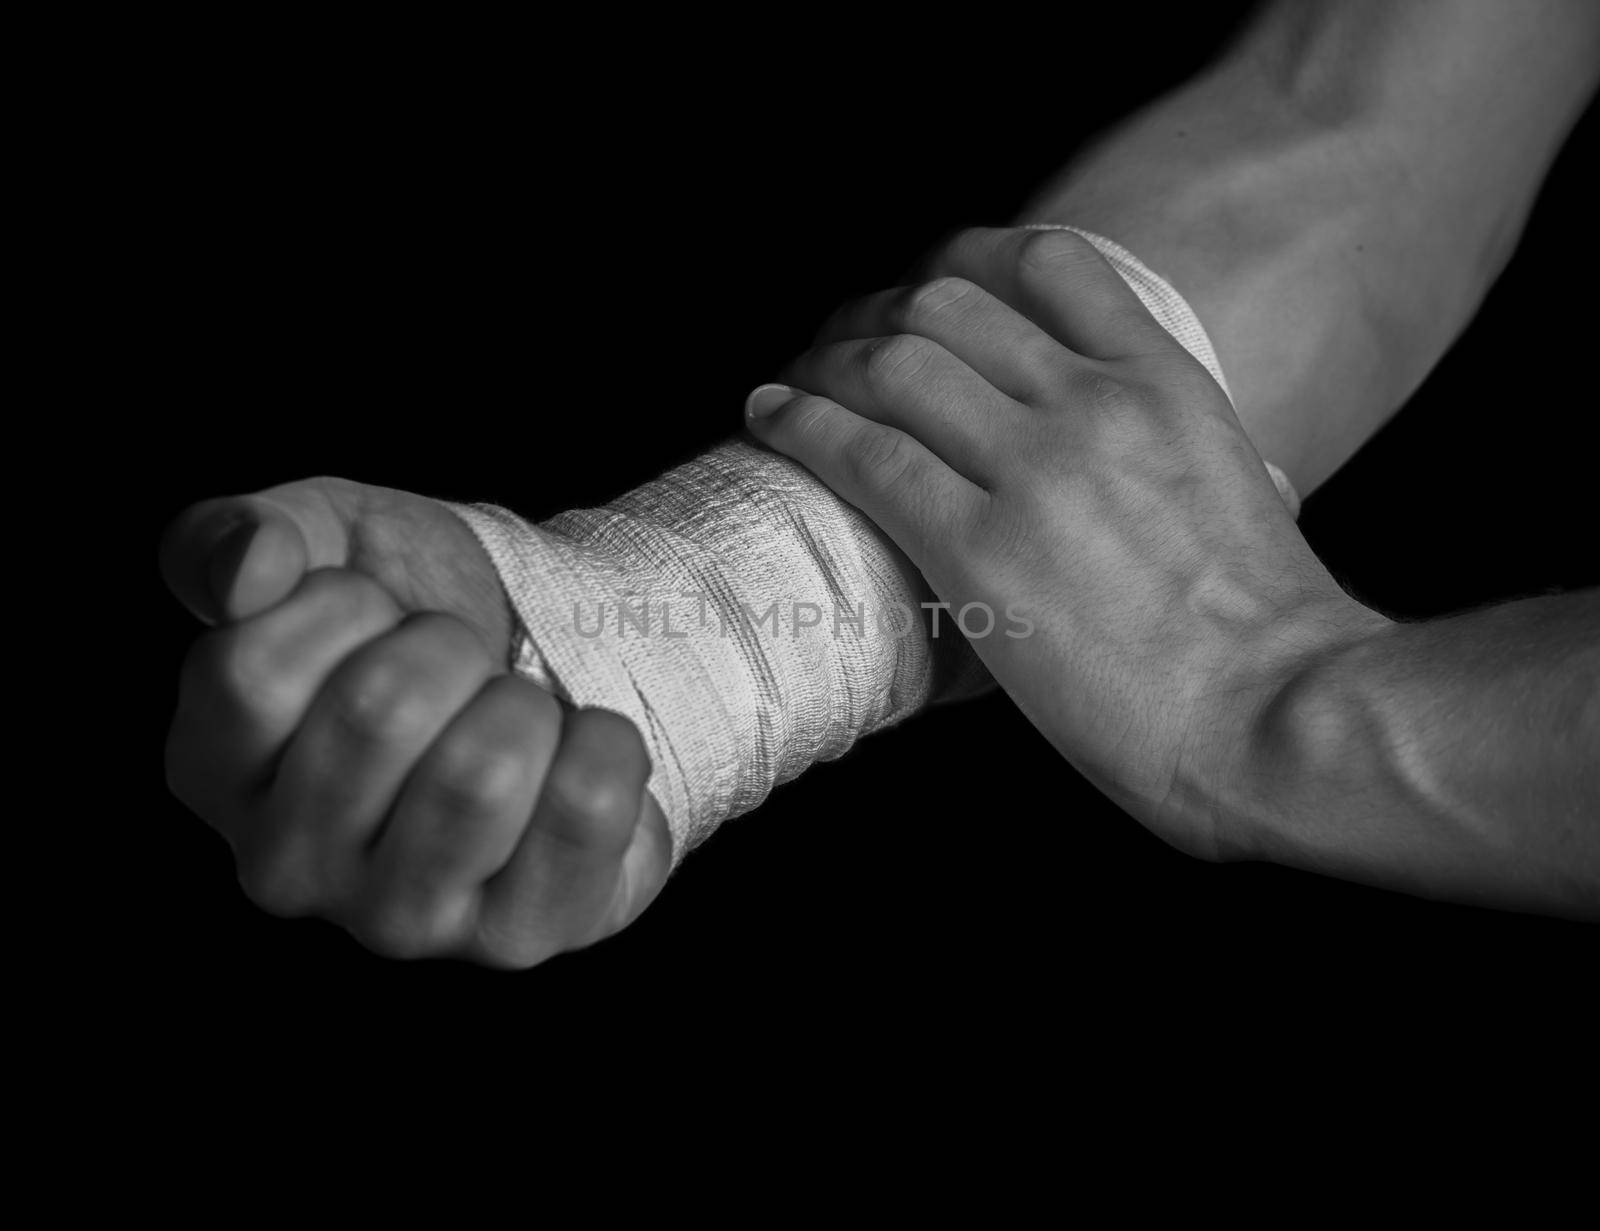 Pain in a male hand, bandaged hand, monochrome image